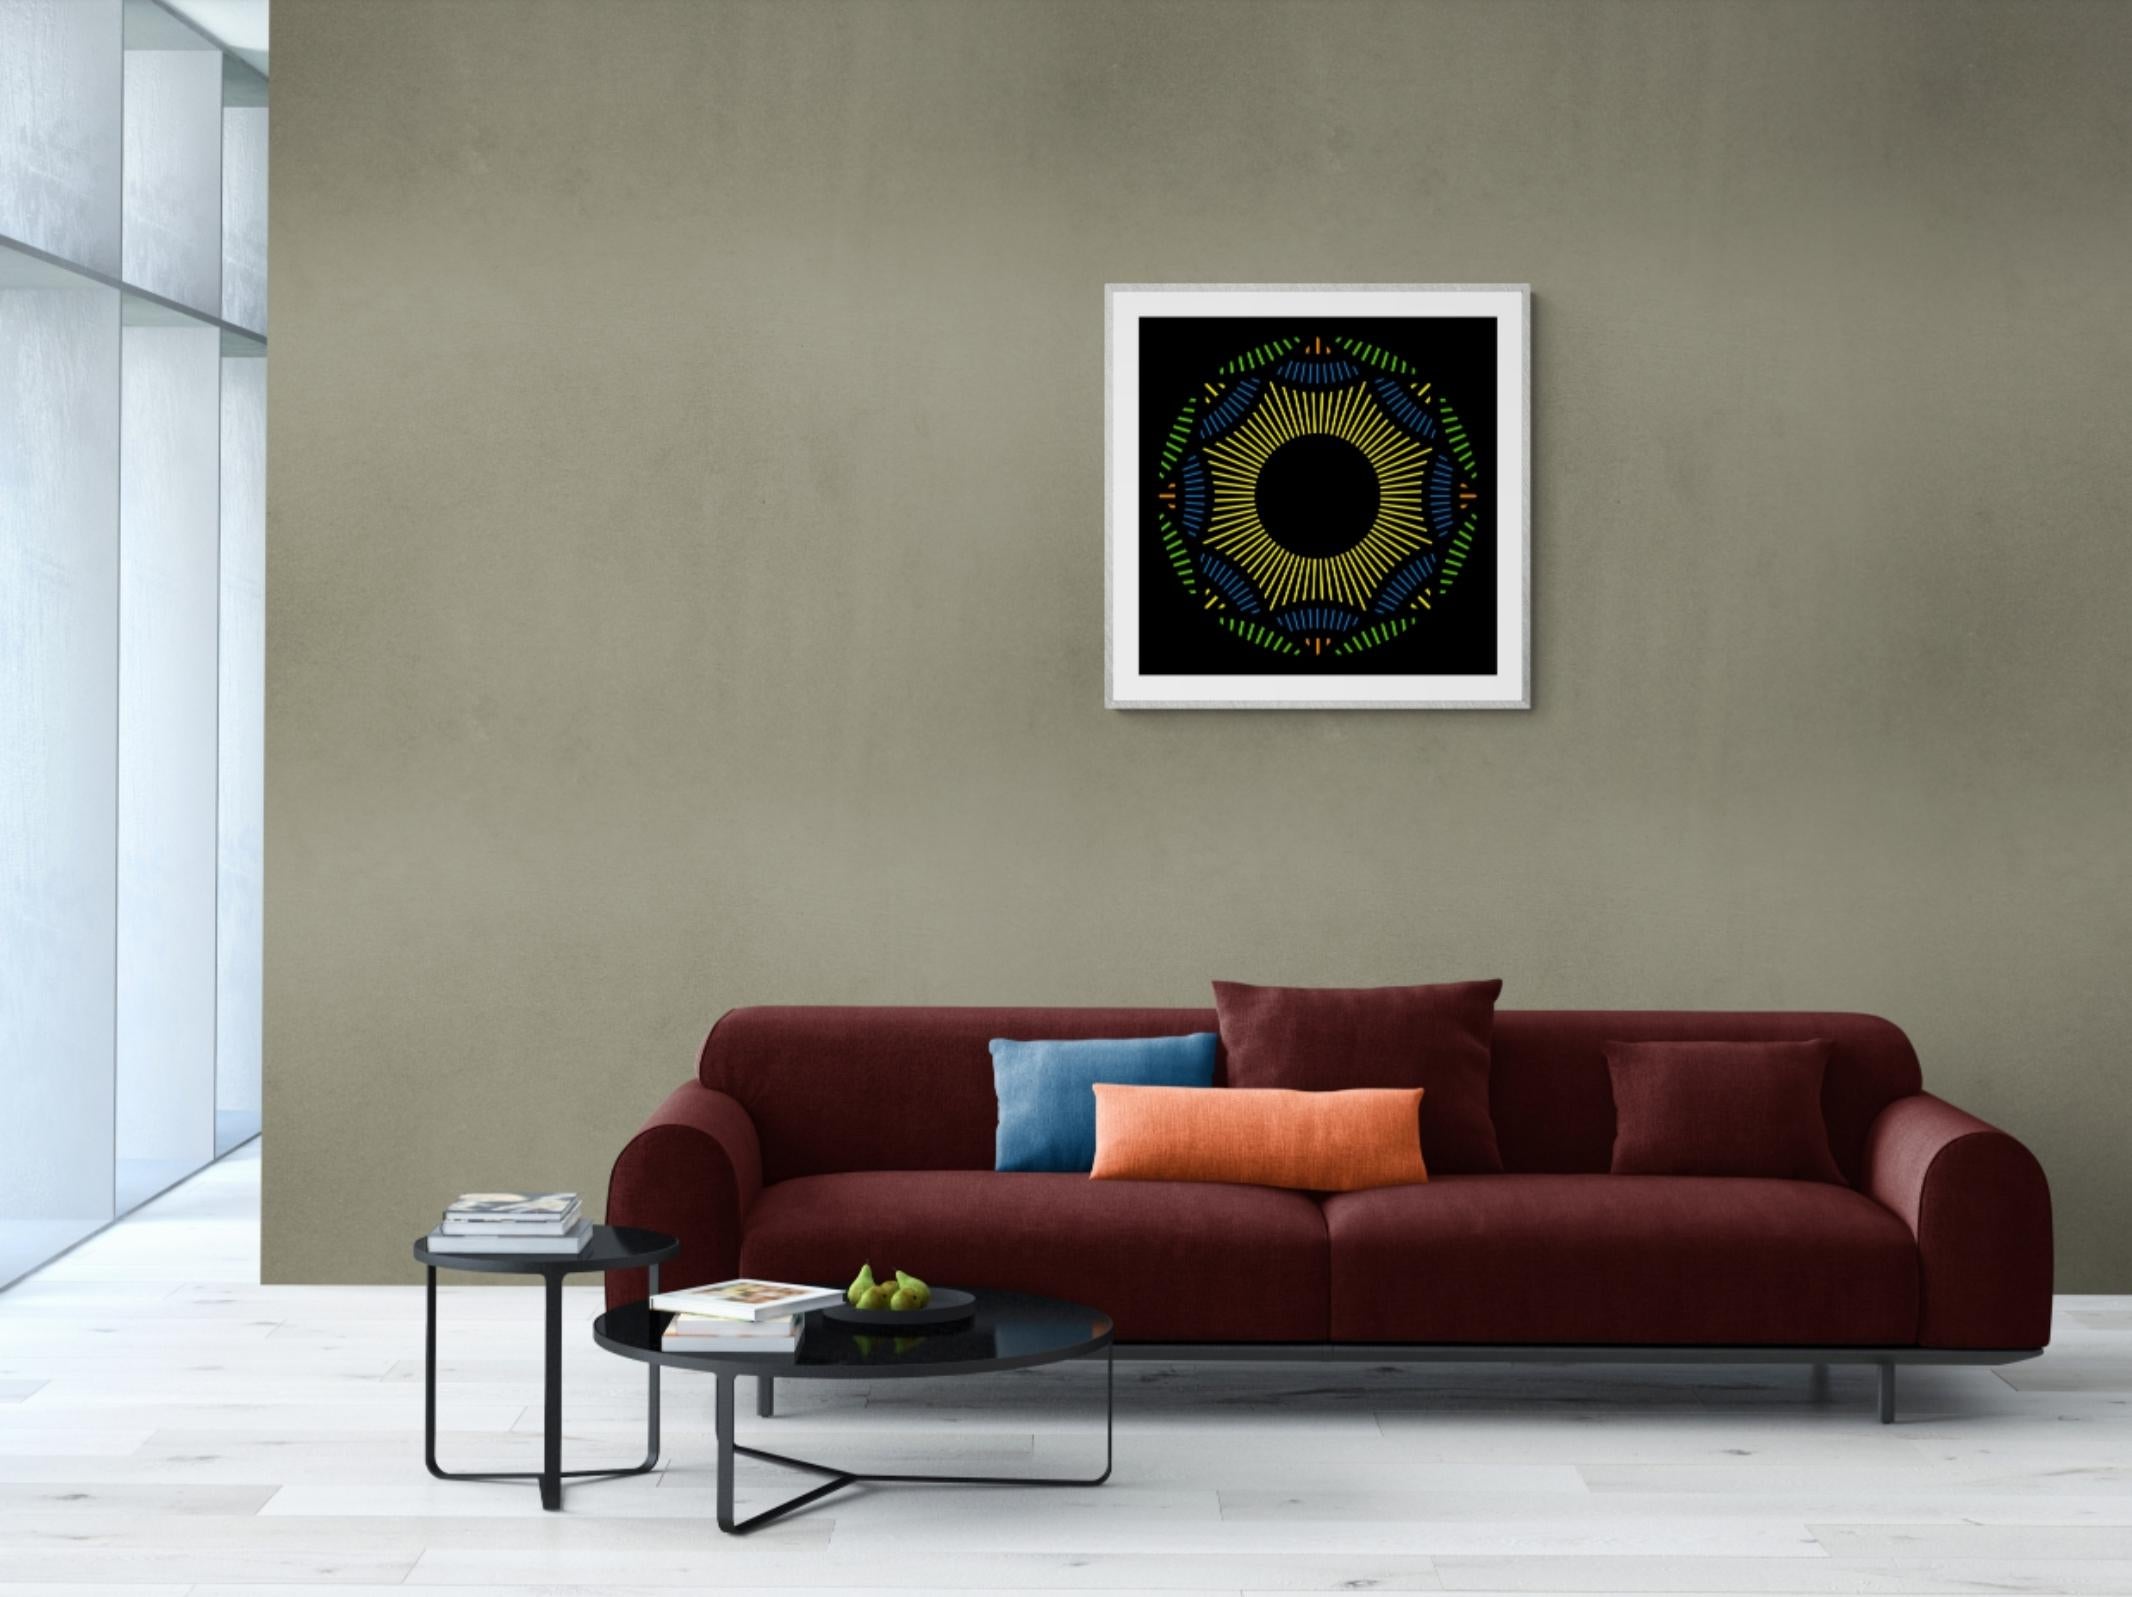 Nebulosa 12 - Abstract Geometric Print by Julio Campos